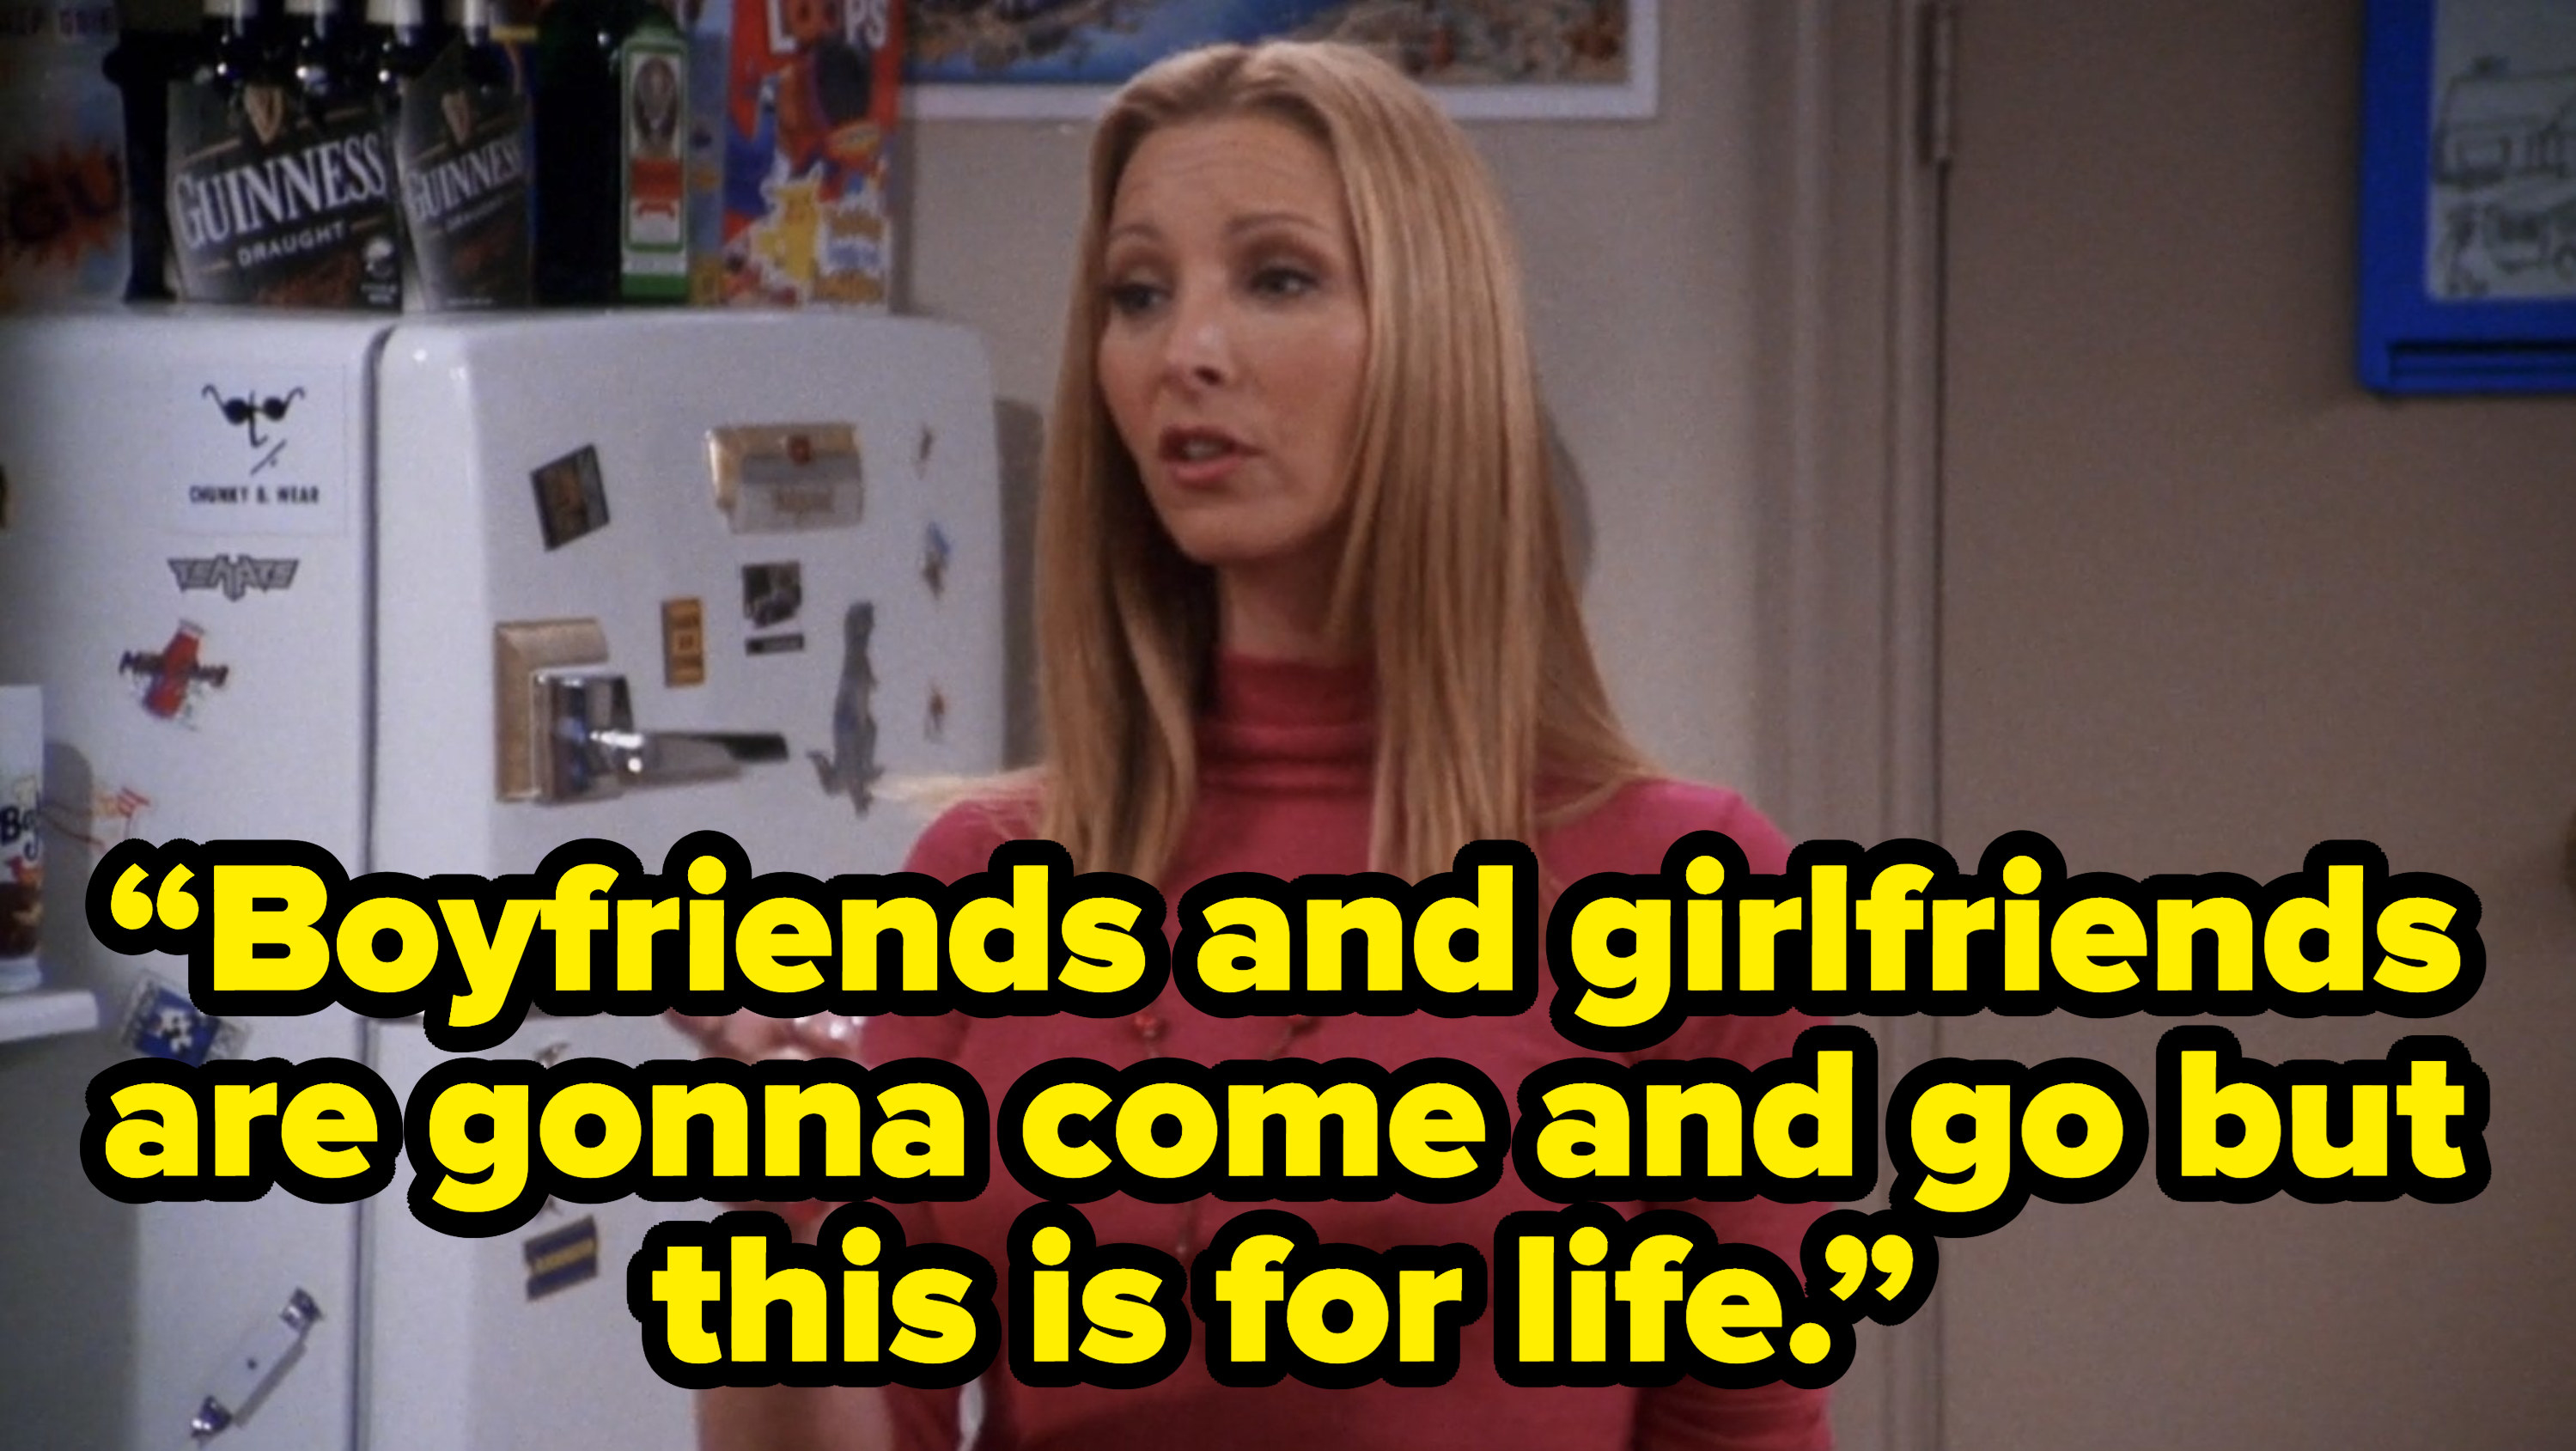 phoebe saying “Boyfriends and girlfriends are gonna come and go but this is for life.” on friends